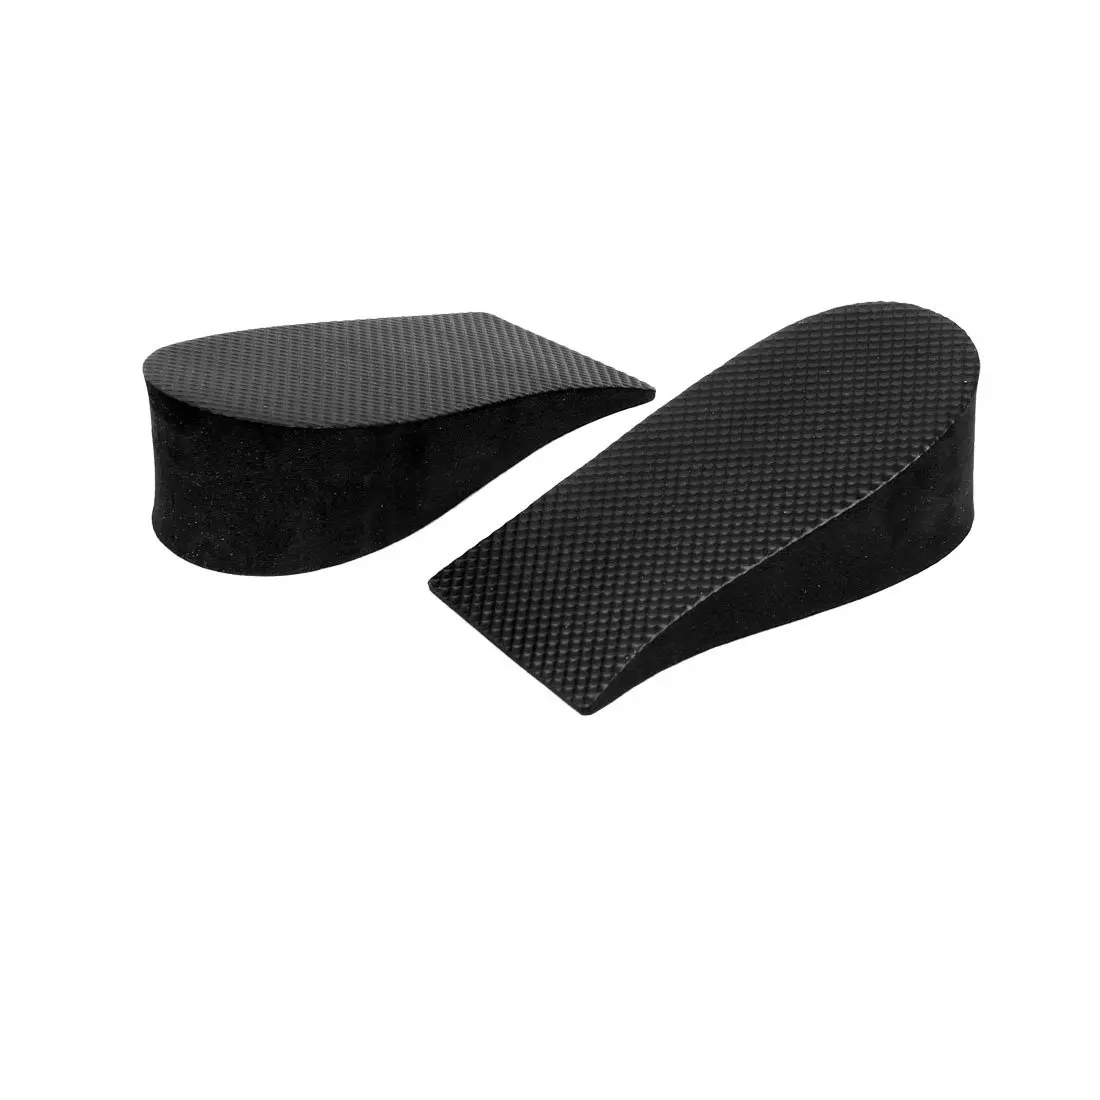 Fashion Boutique 2 Pcs 1.5 Height Increase Heel Lifts Foam Pads Insoles Black